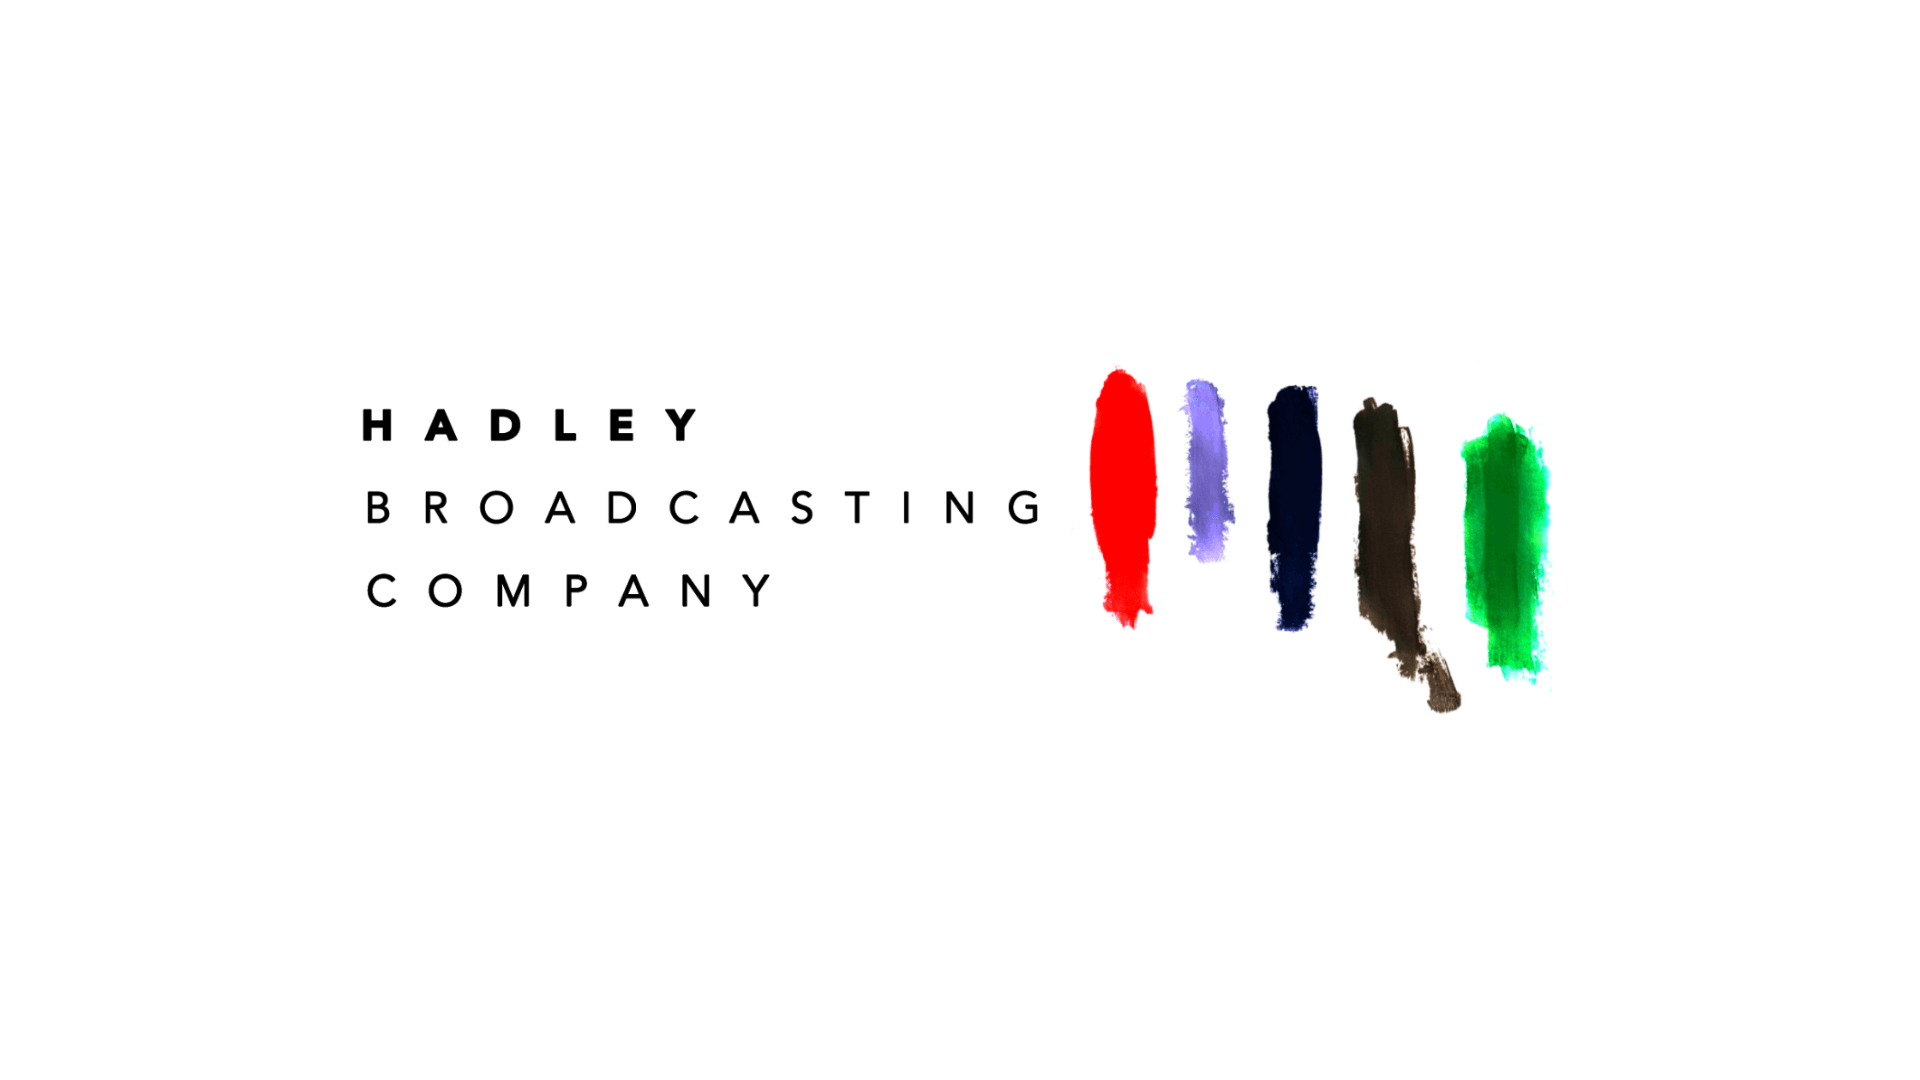 The_Hadley_Broadcasting_Company banner